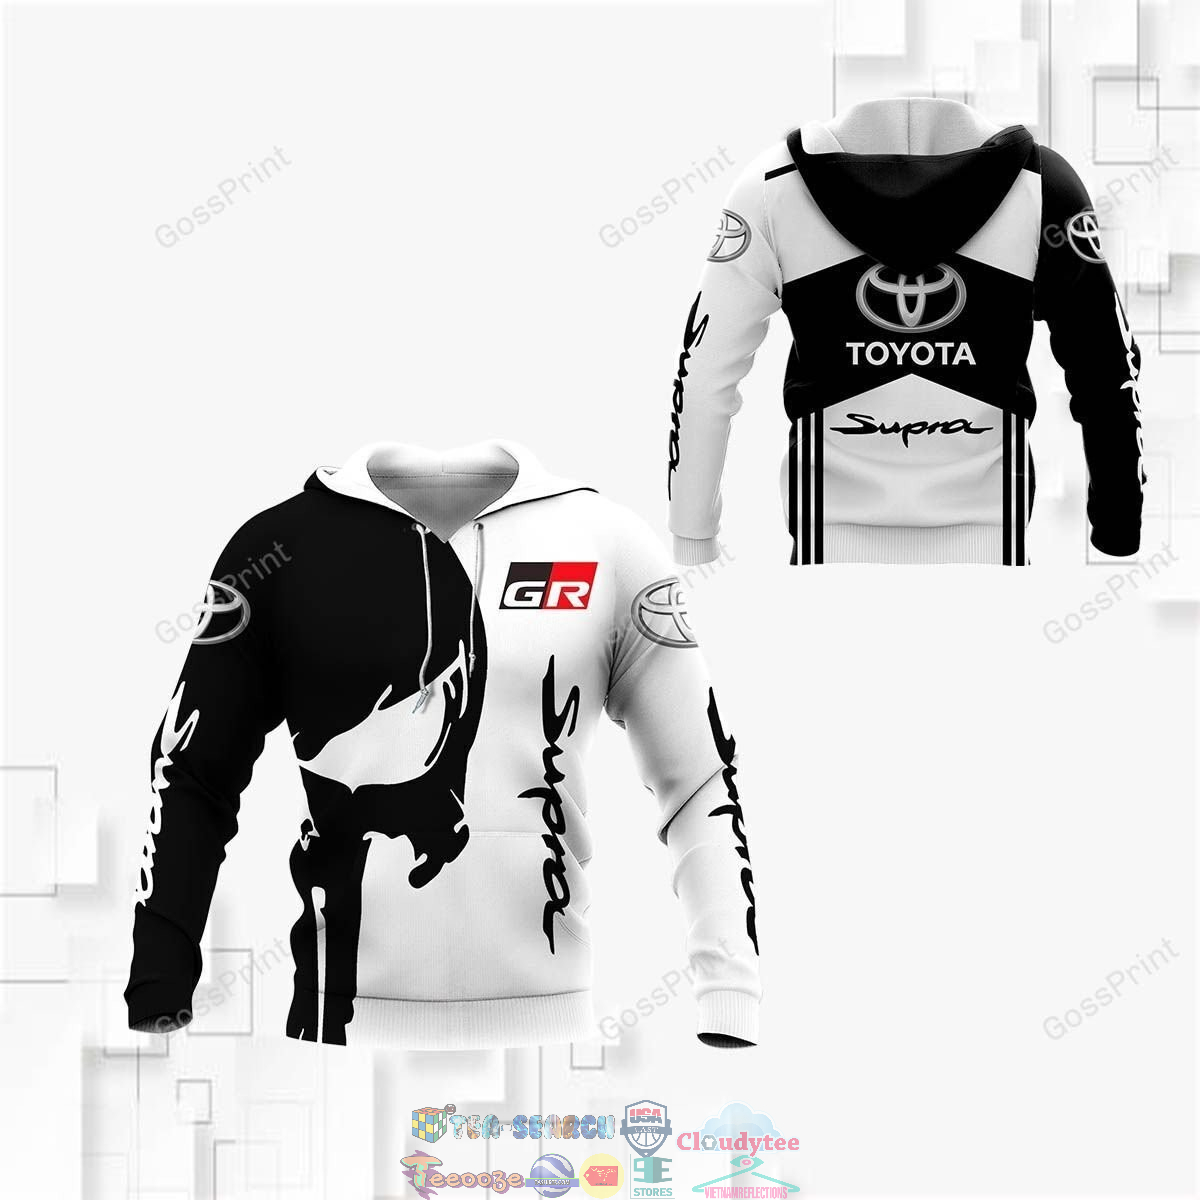 Toyota Supra ver 7 3D hoodie and t-shirt